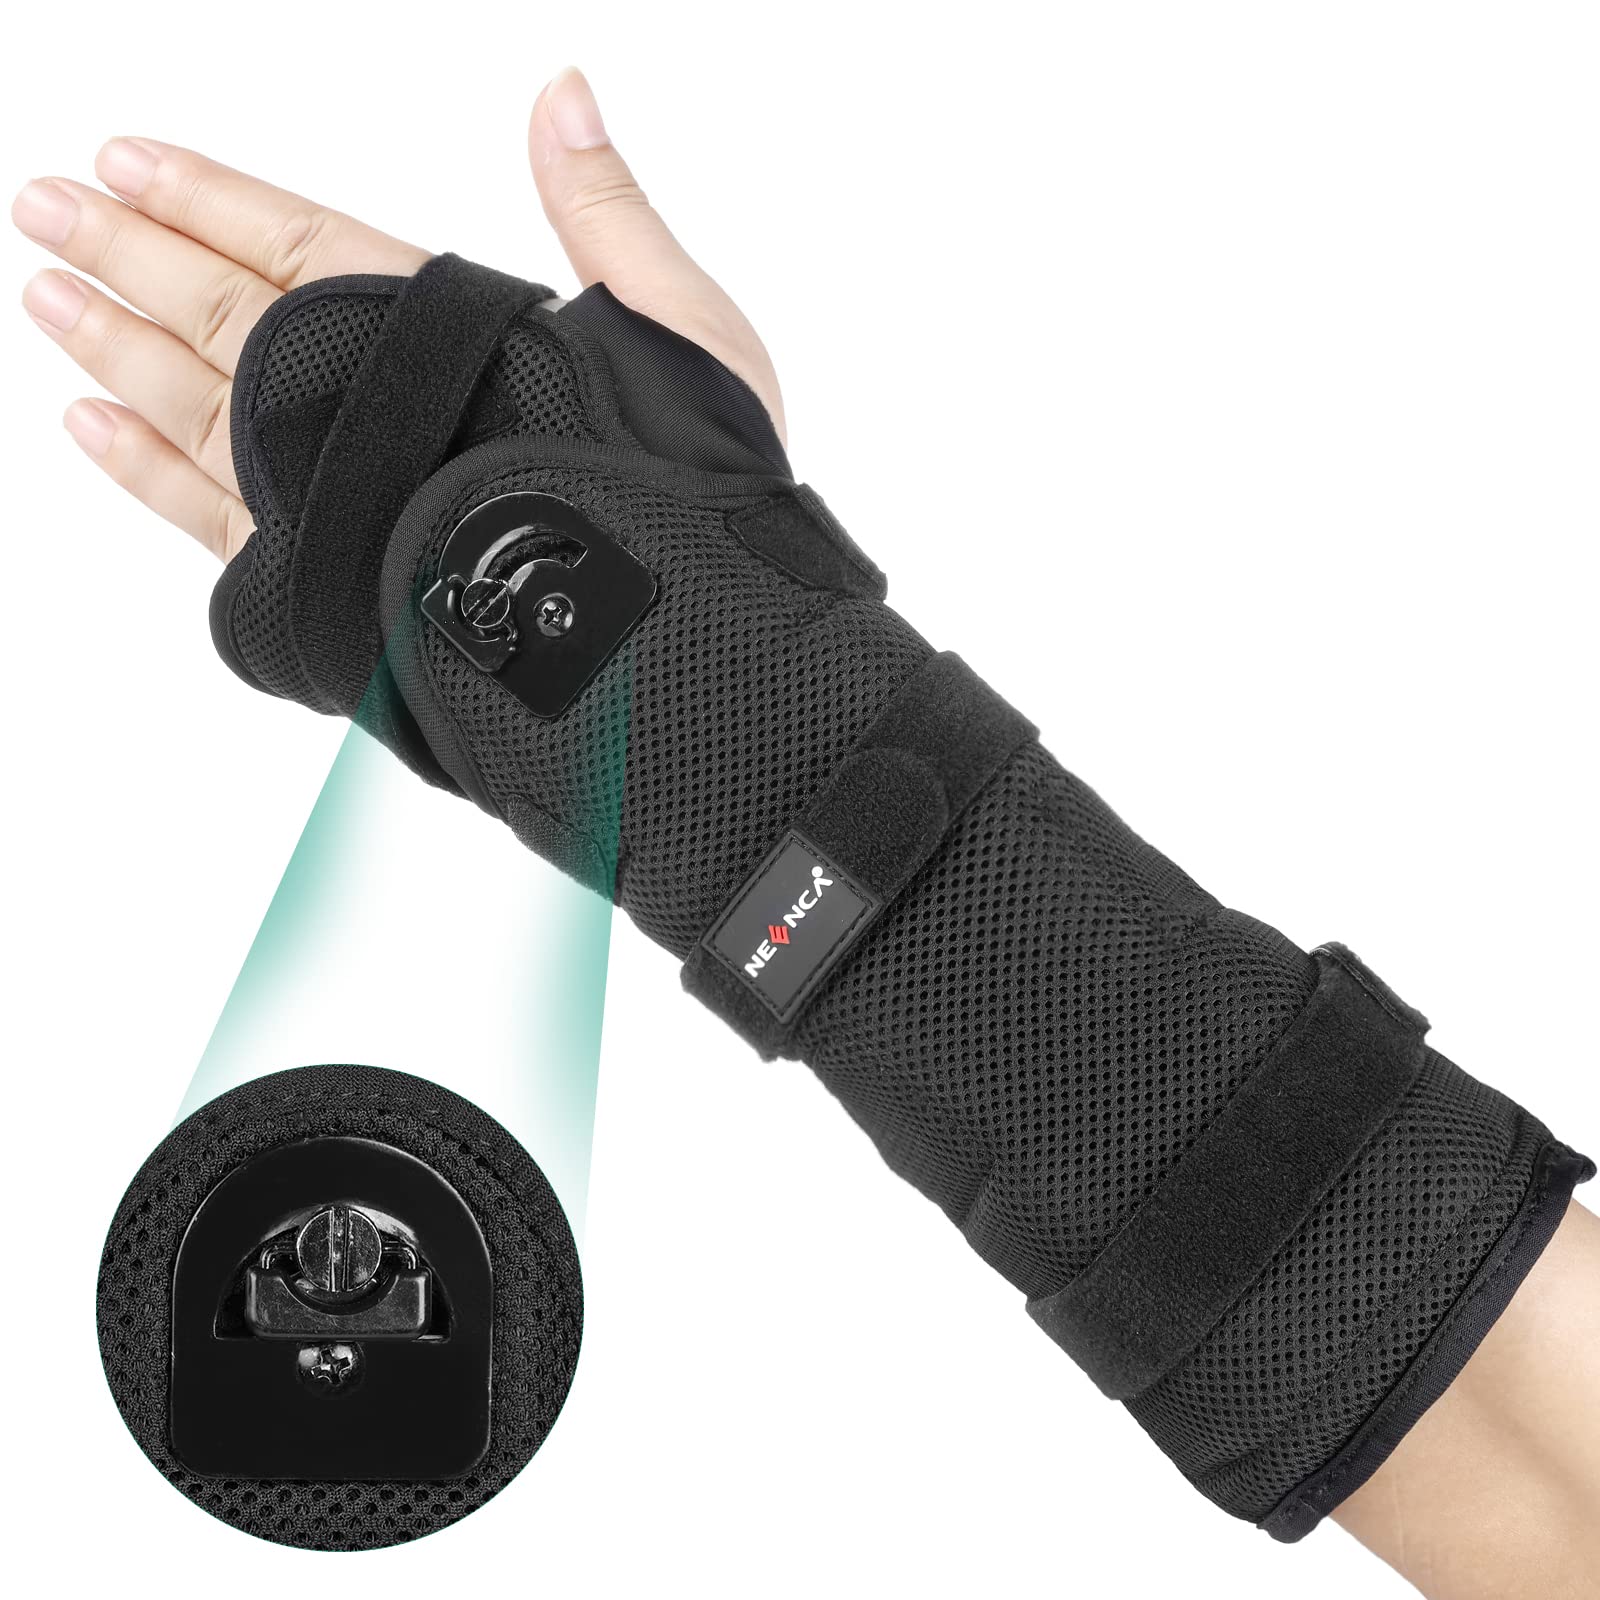 Night Sleep Support Wrist Brace - Carpal Tunnel Relief - Fits Both